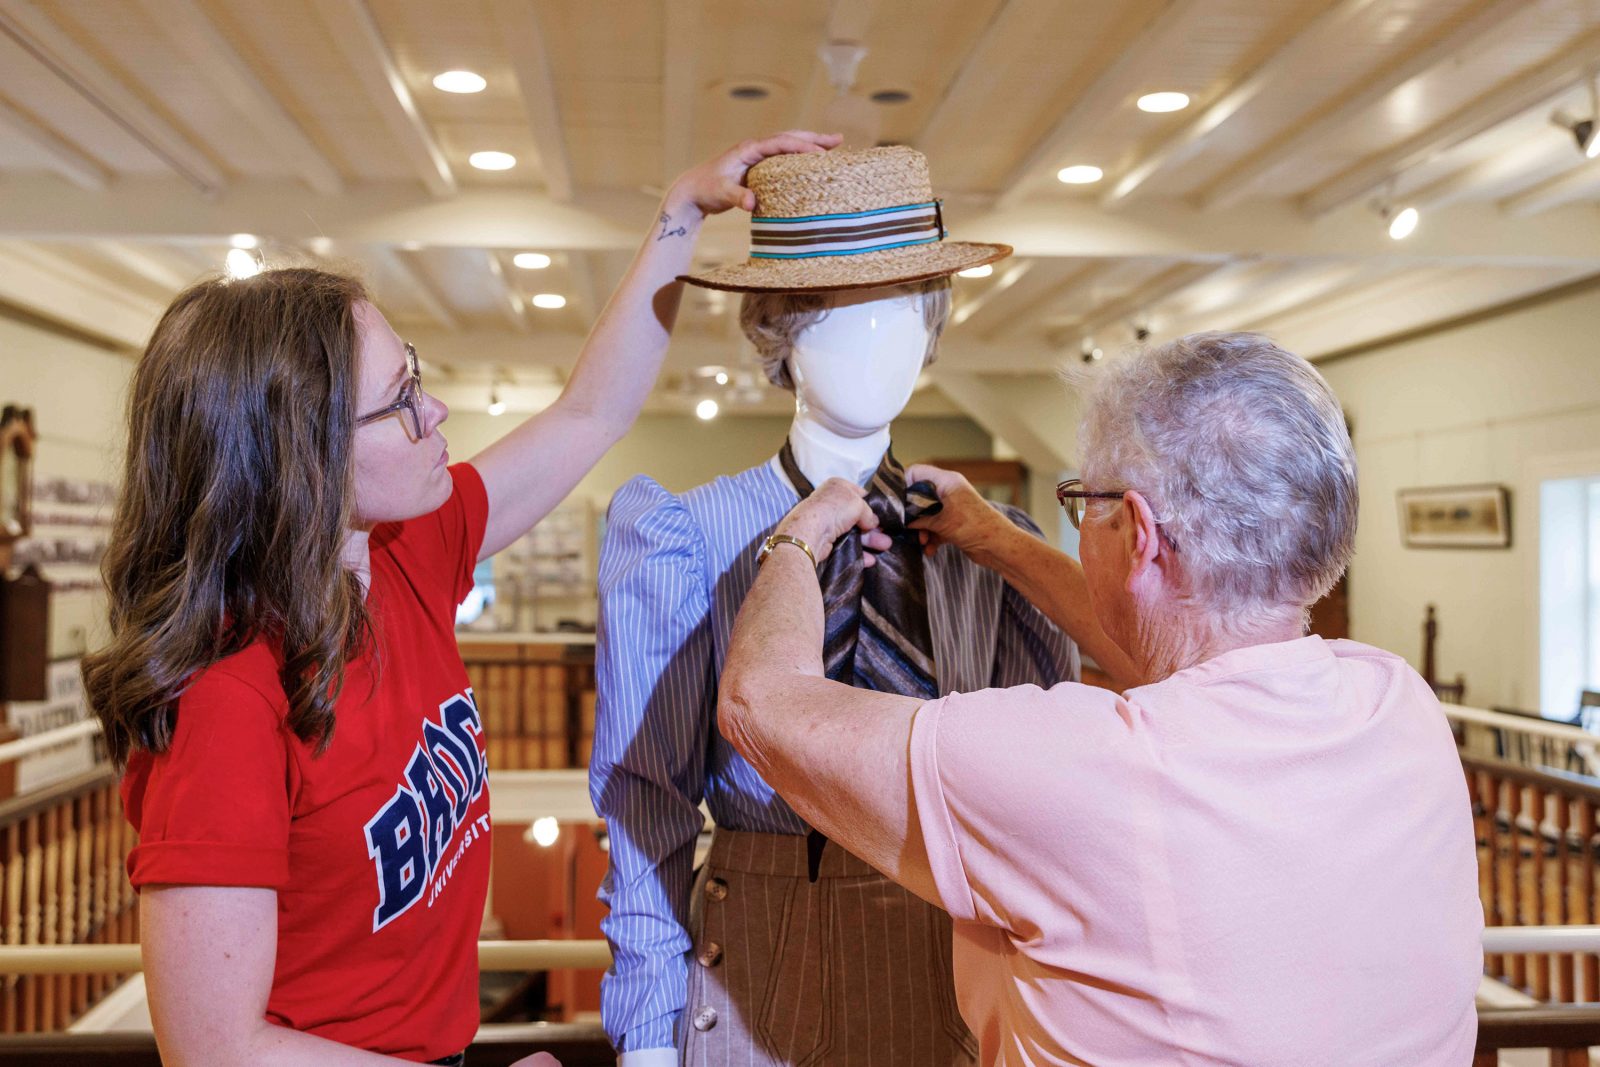 Two women put old-fashioned clothing and a hat on a mannequin.